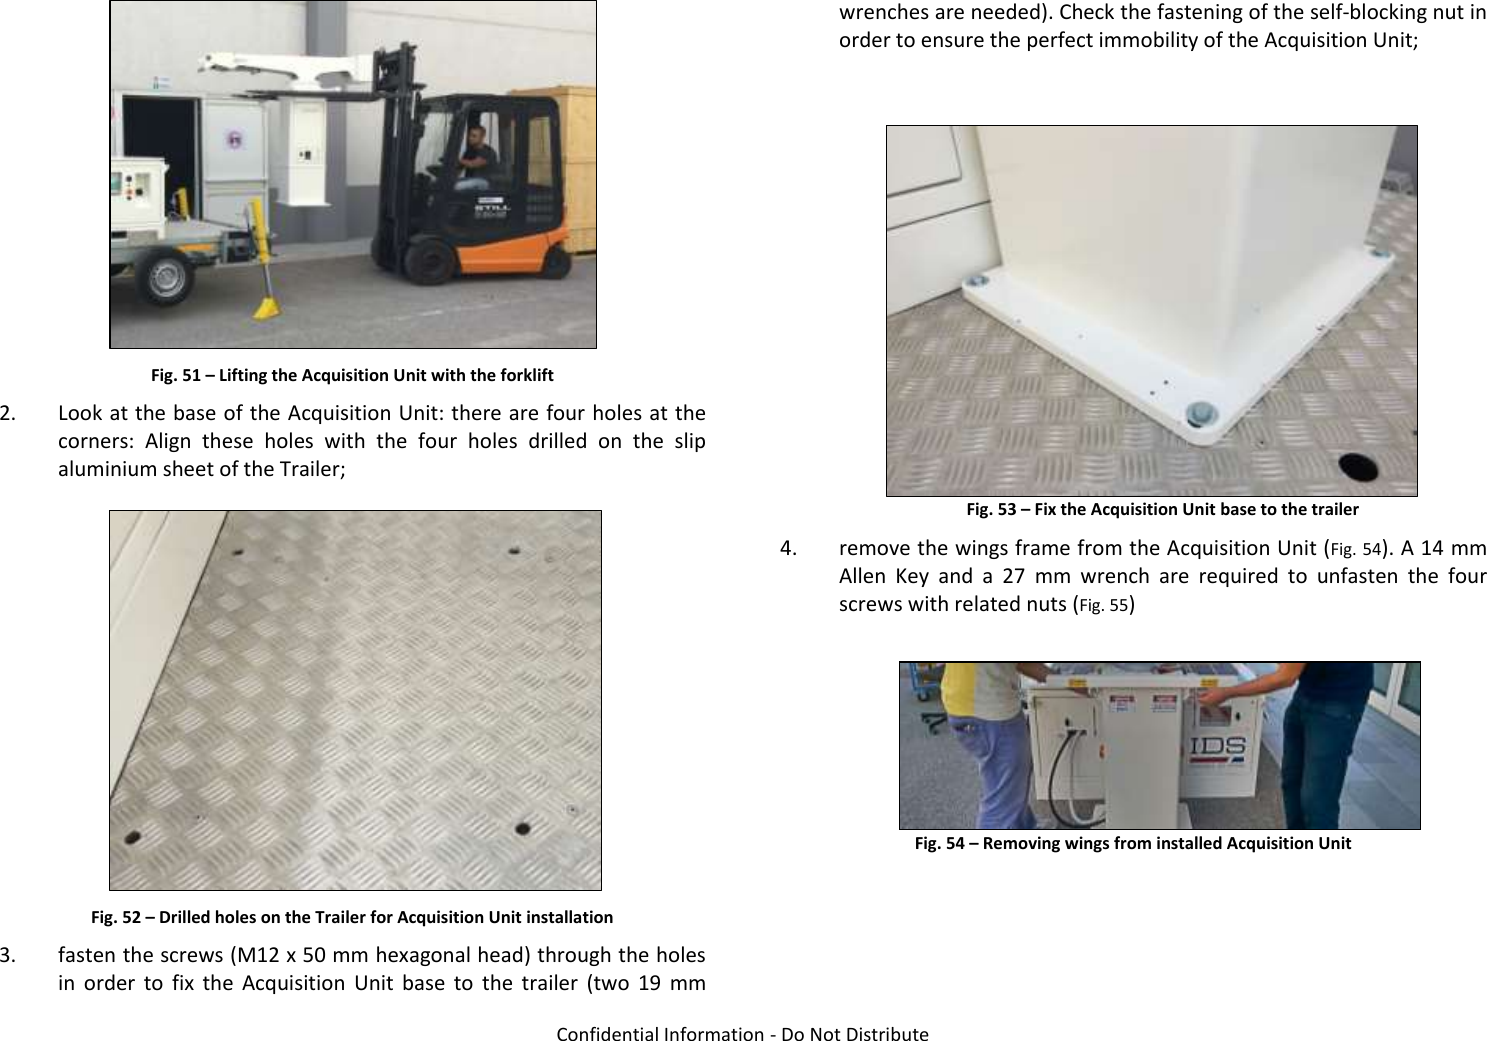   Confidential Information - Do Not Distribute   Fig. 51 – Lifting the Acquisition Unit with the forklift 2. Look at the base of the Acquisition Unit: there are four holes at the corners:  Align  these  holes  with  the  four  holes  drilled  on  the  slip aluminium sheet of the Trailer;    Fig. 52 – Drilled holes on the Trailer for Acquisition Unit installation 3. fasten the screws (M12 x 50 mm hexagonal head) through the holes in  order  to  fix  the  Acquisition  Unit  base  to  the  trailer  (two  19  mm wrenches are needed). Check the fastening of the self-blocking nut in order to ensure the perfect immobility of the Acquisition Unit;   Fig. 53 – Fix the Acquisition Unit base to the trailer 4. remove the wings frame from the Acquisition Unit (Fig. 54). A 14 mm Allen  Key  and  a  27  mm  wrench  are  required  to  unfasten  the  four screws with related nuts (Fig. 55) Fig. 54 – Removing wings from installed Acquisition Unit 